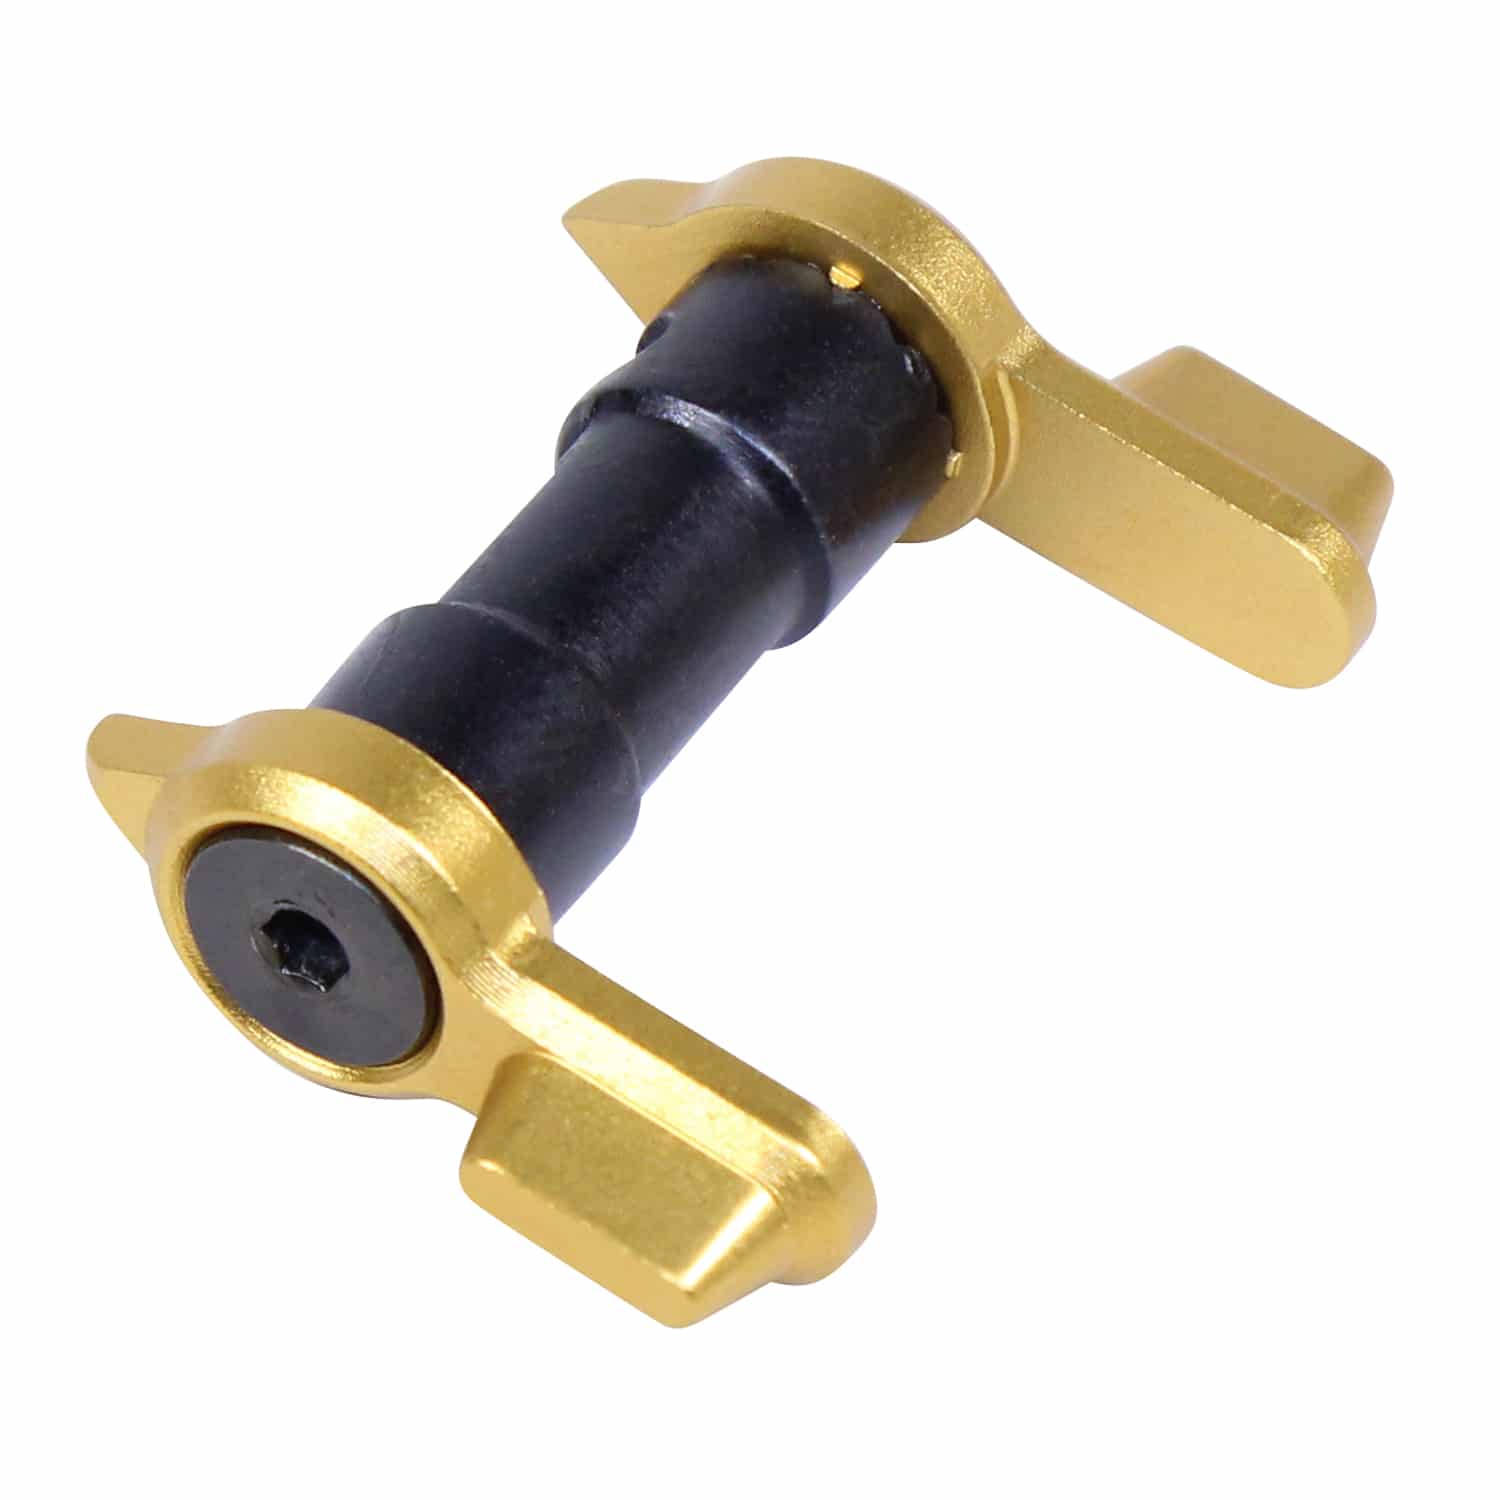 AR-15 Ambidextrous Safety in Anodized Gold with 90 or 45 degree